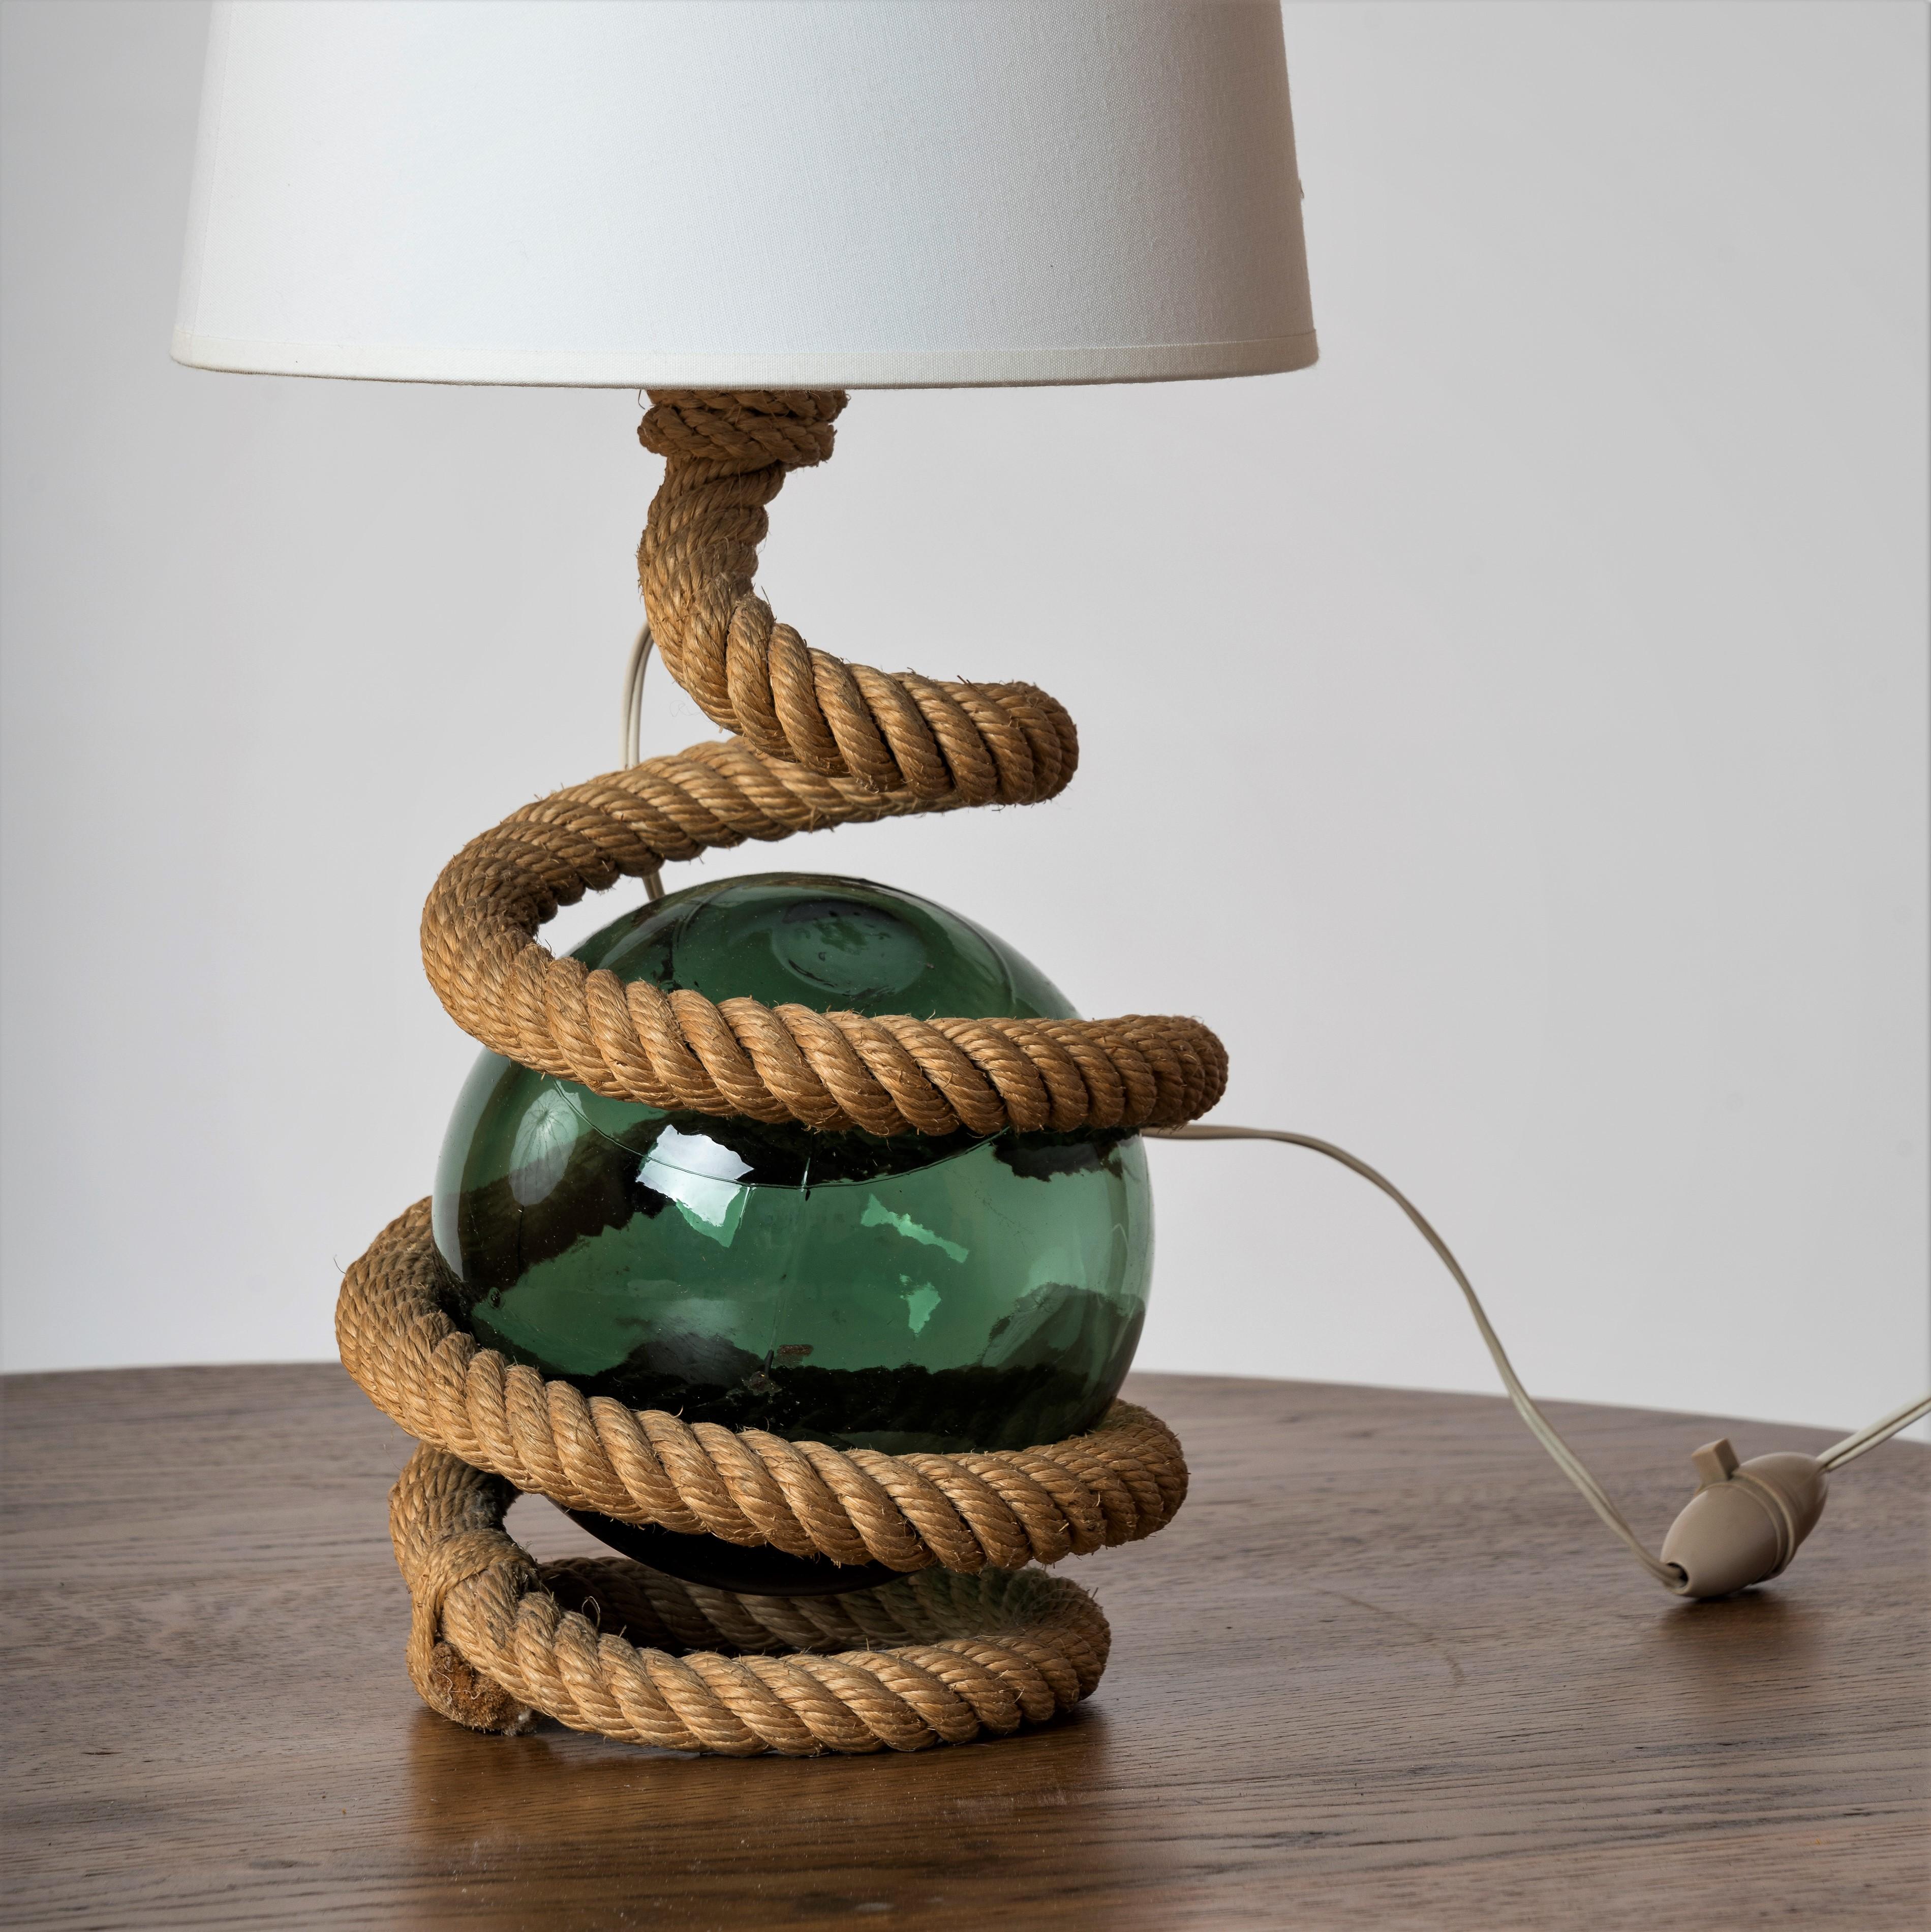 Serpentine rope table lamp with marine green glass ball in the center. Most likely by French iconic designers Adrien Audoux and Frida Minnet from the French Riviera region. Typical of 1960's production.
French bayonet bulb socket. European wiring.